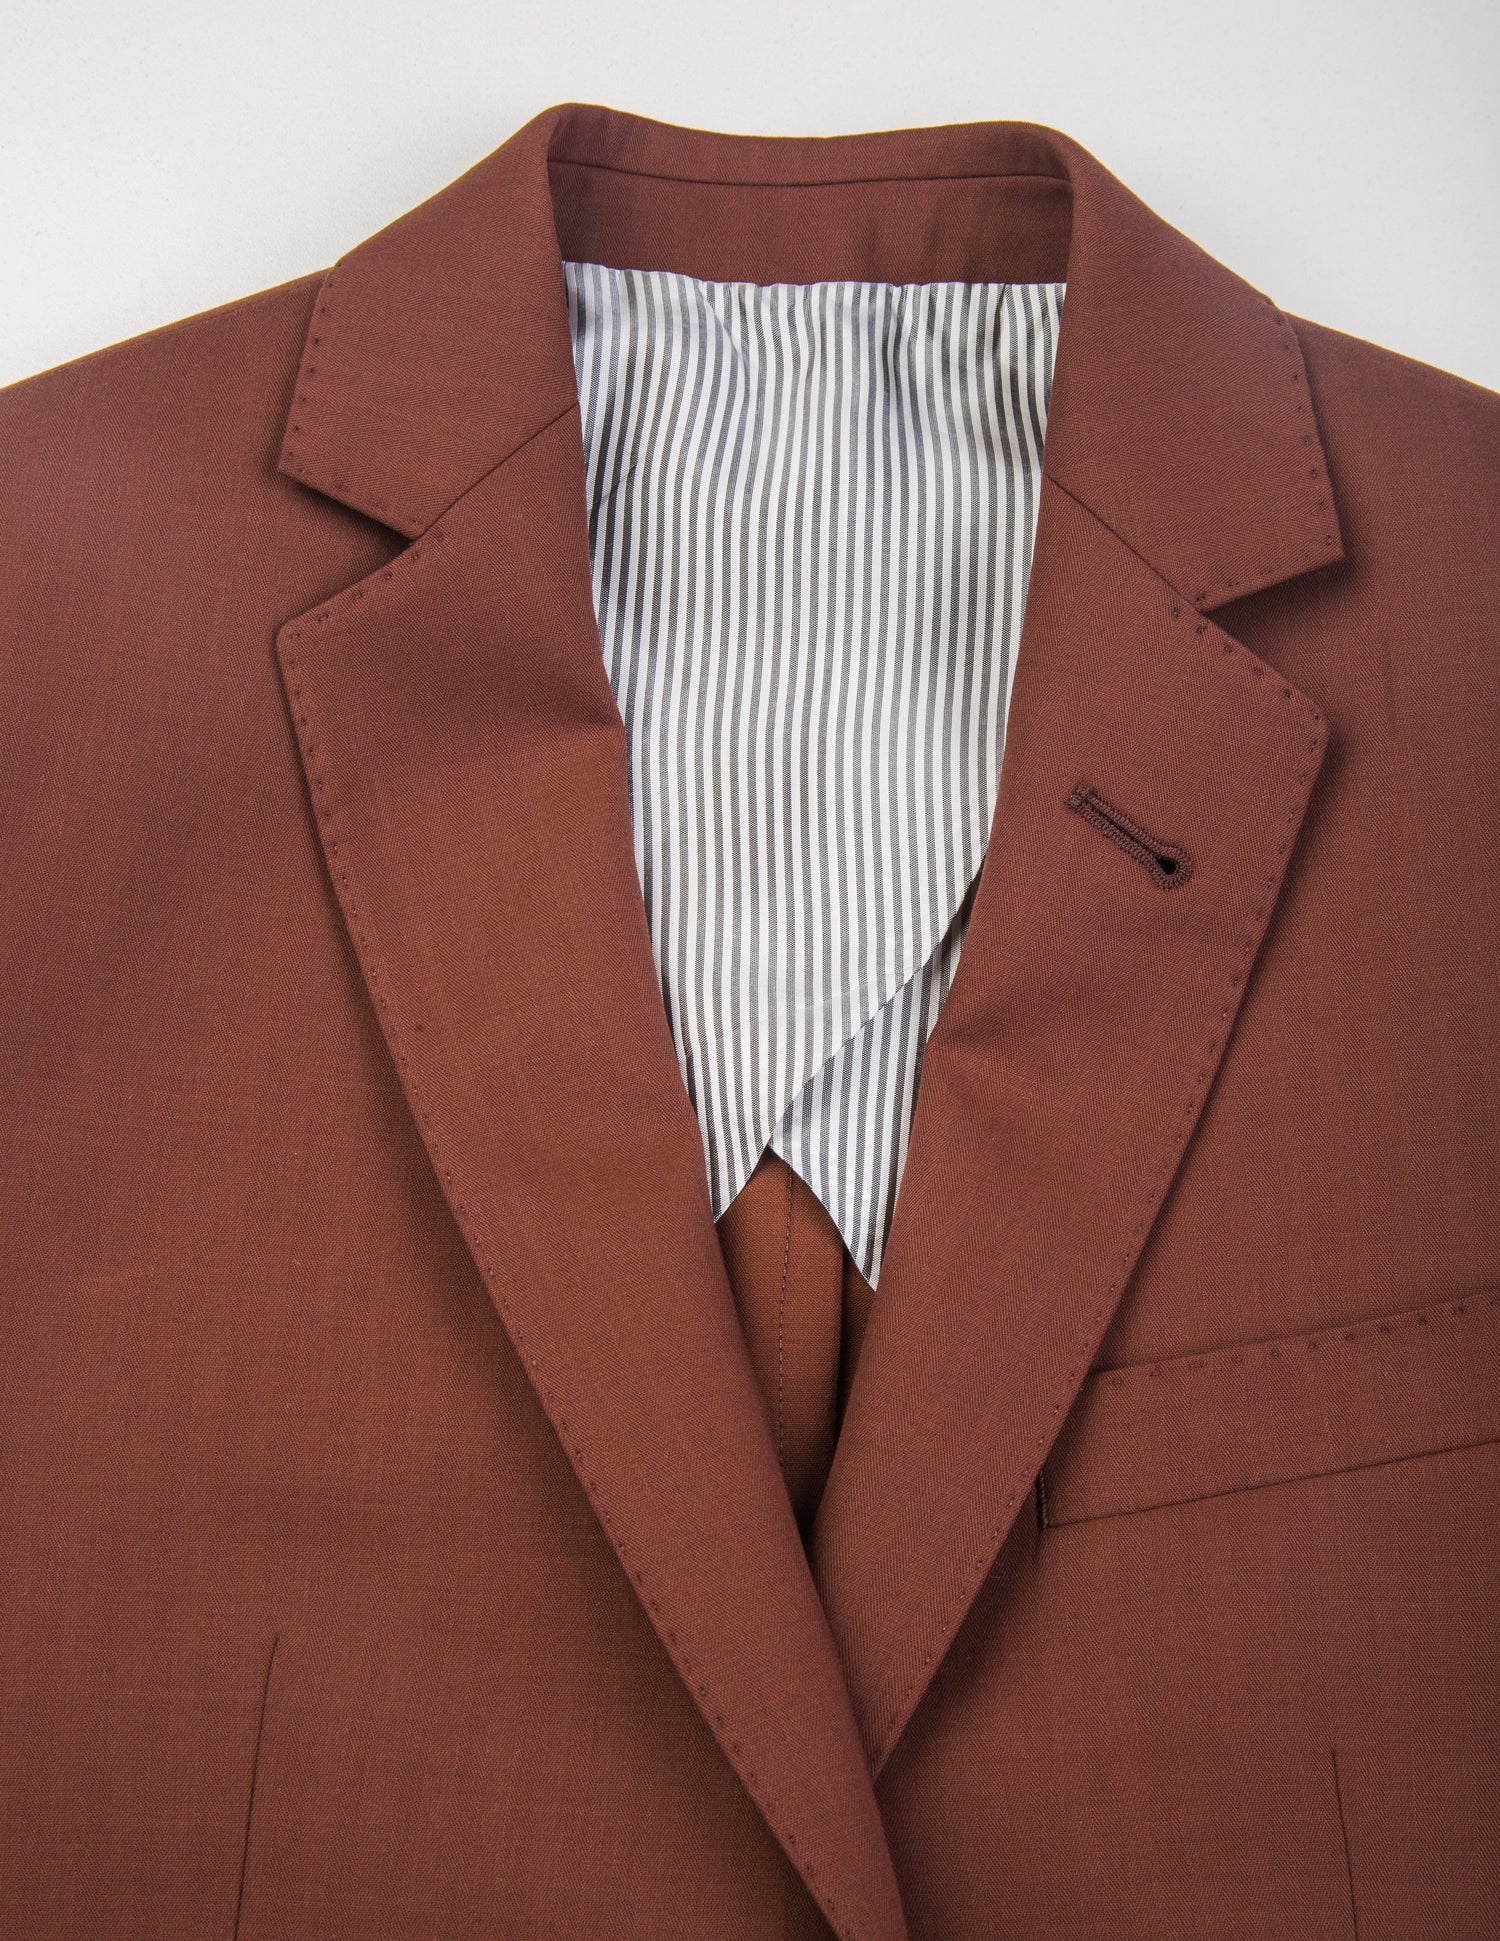 Detail shot of Brooklyn Tailors BKT50 Tailored Jacket in Herringbone Wool/Cotton - Brick showing lapel, and half-lining